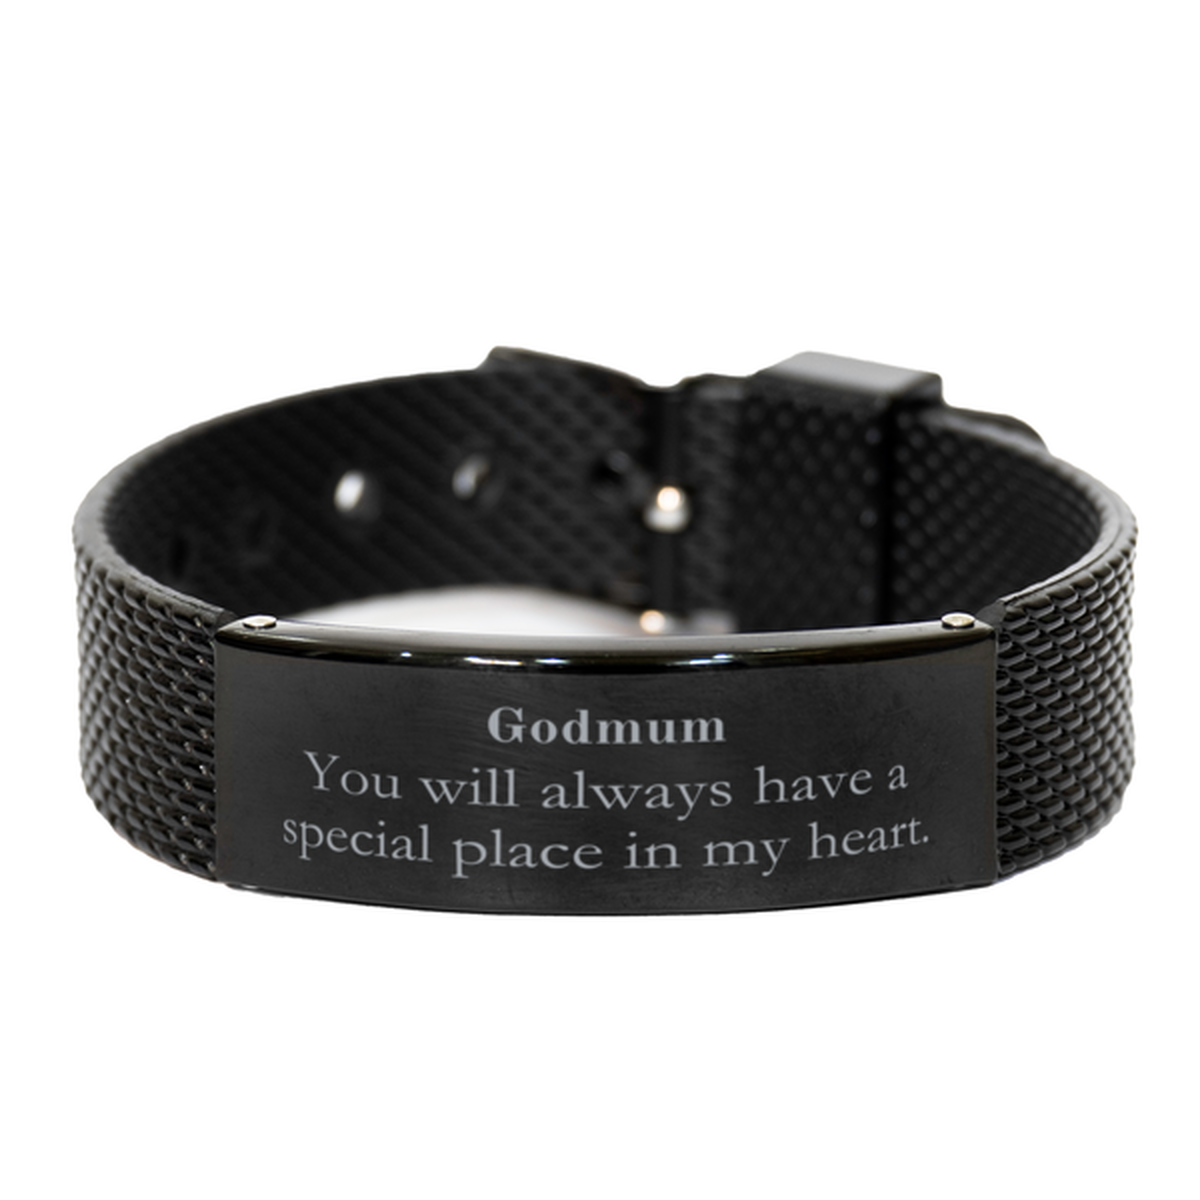 Godmum Black Shark Mesh Bracelet, Special Gift for You, Inspirational Engraved Jewelry for Birthday, Christmas, Graduation, Veterans Day, and Easter